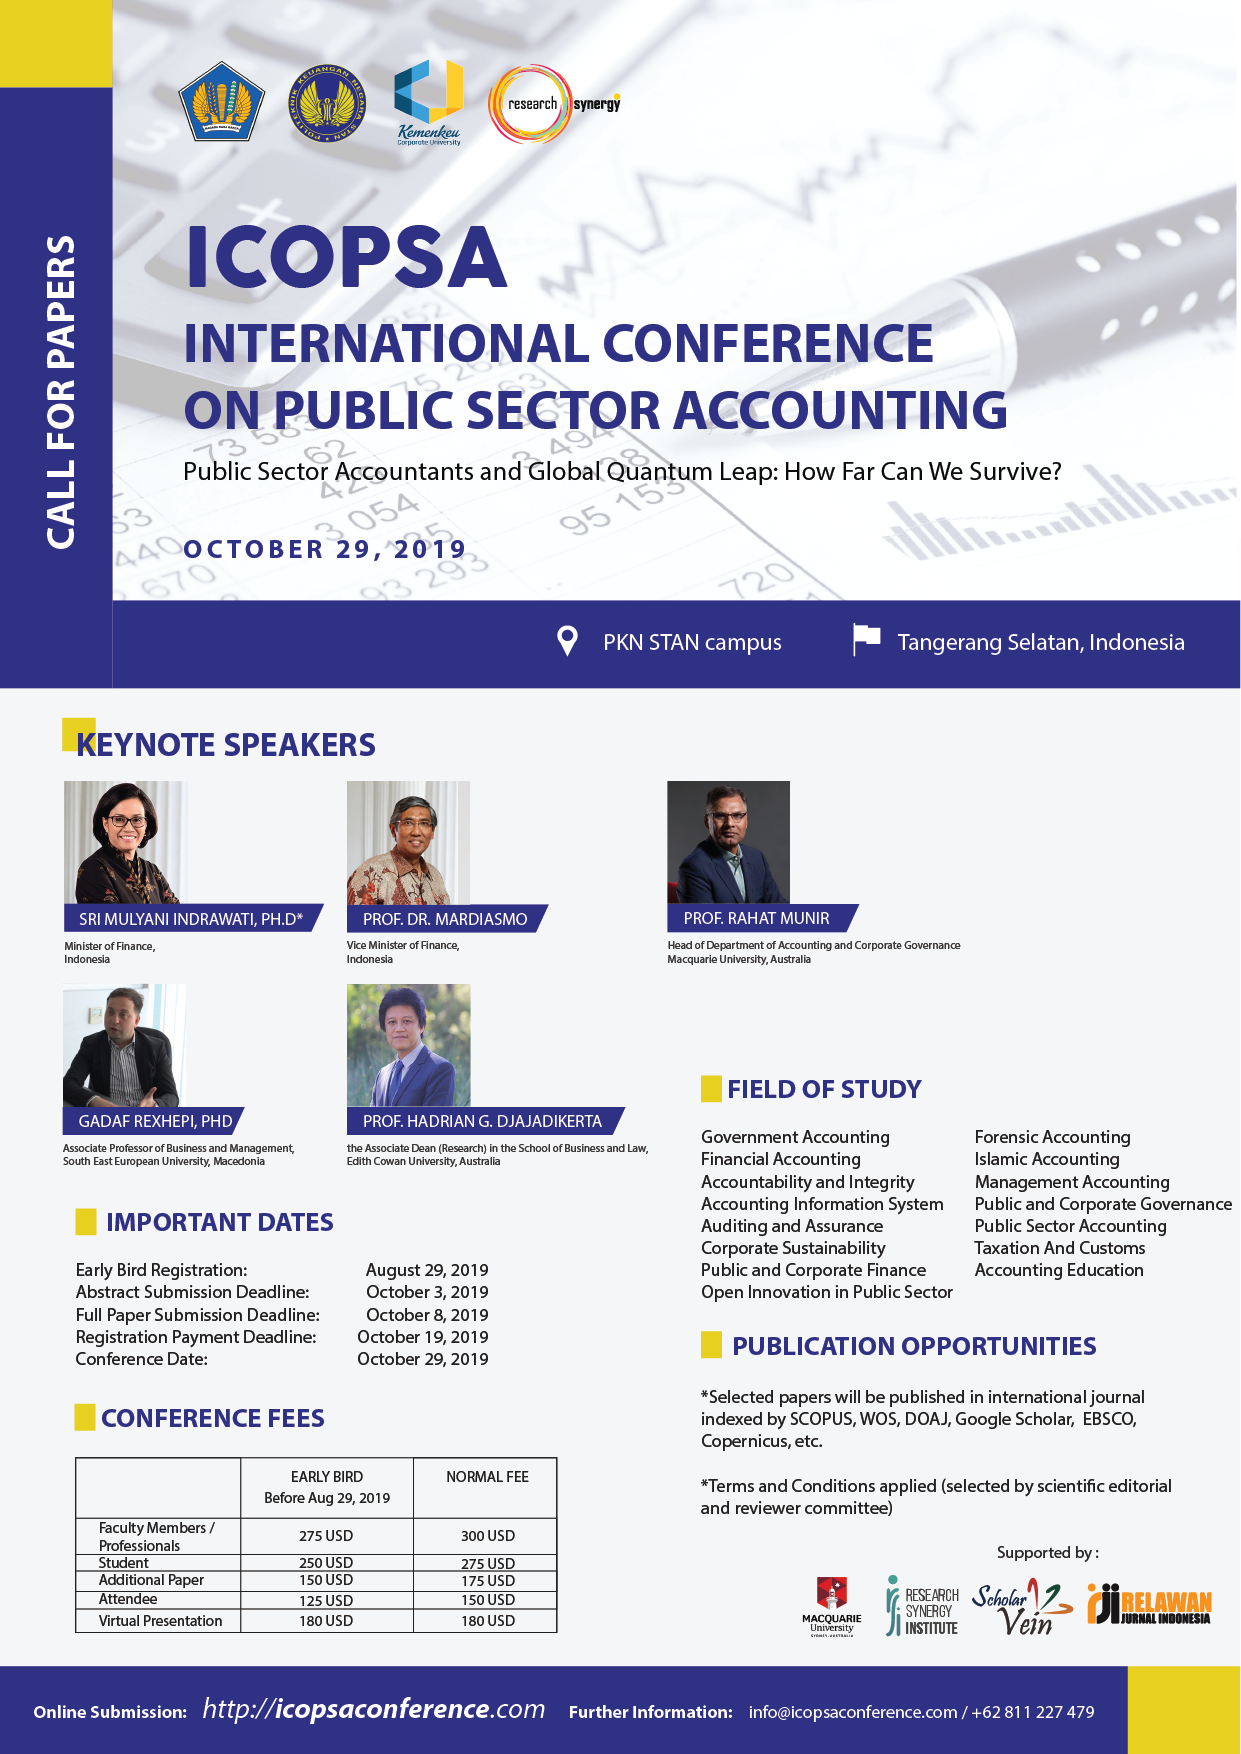 International Conference on Public Sector Accounting (ICOPSA)